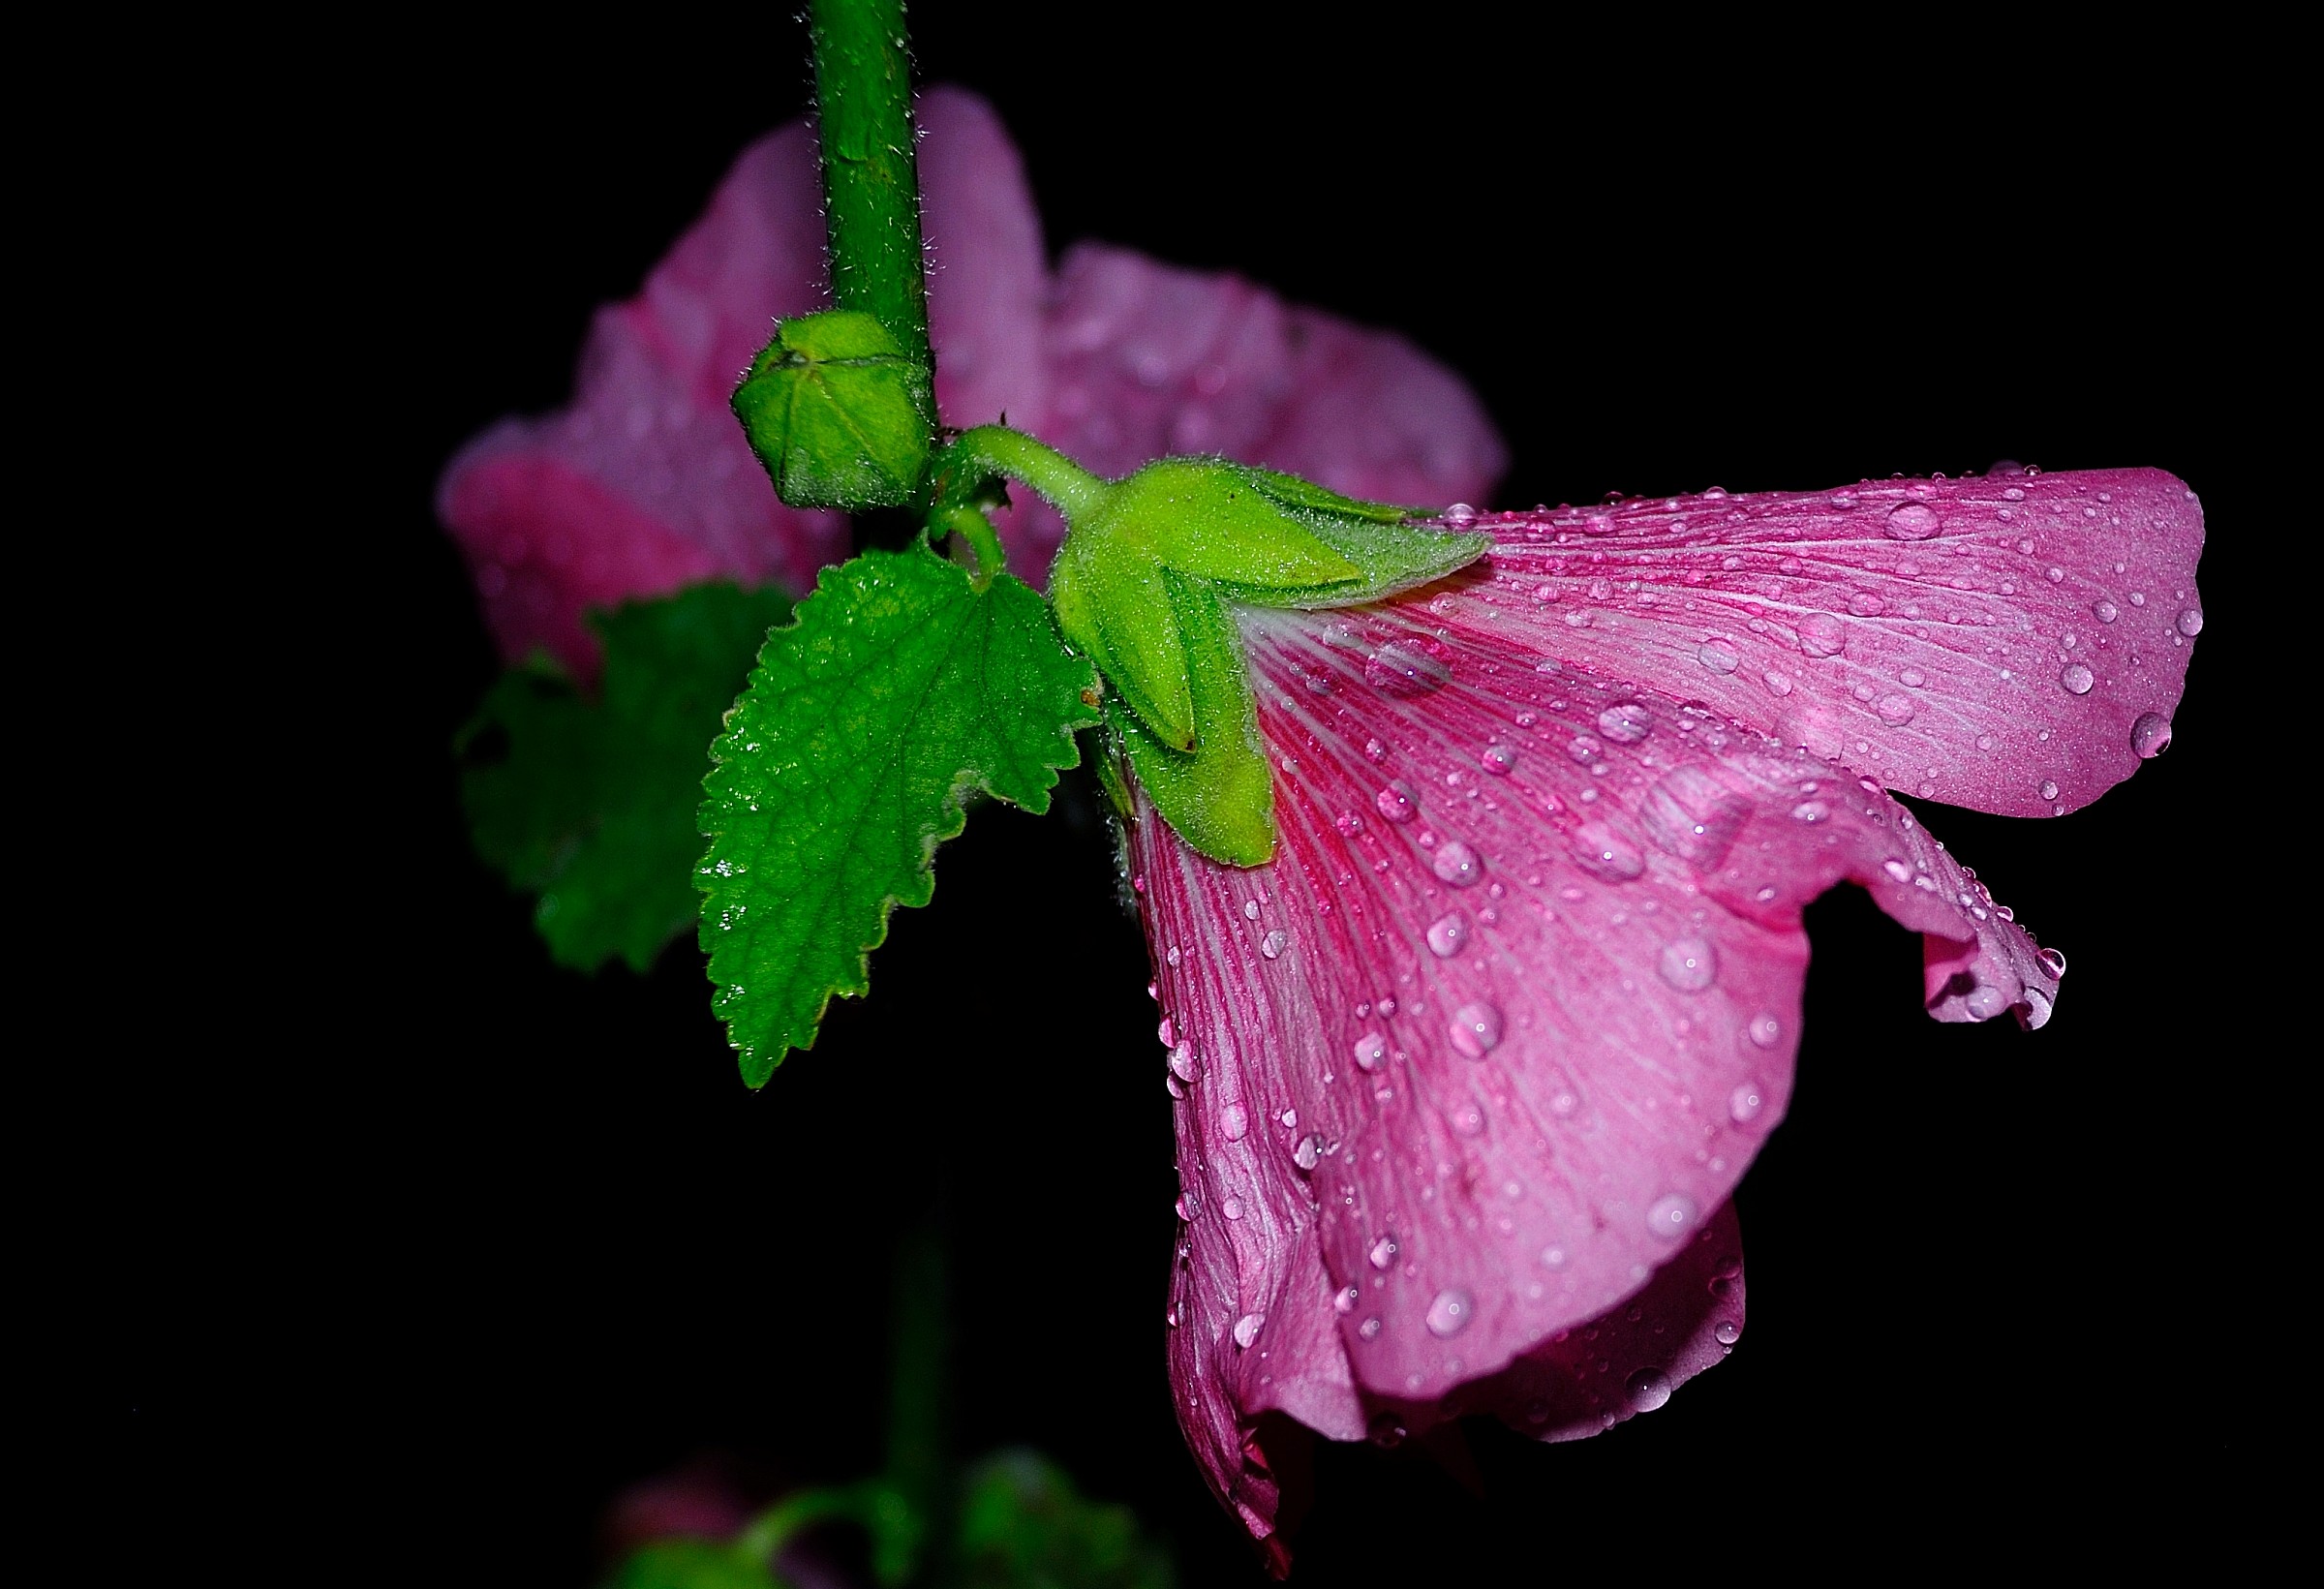 The precious drops on the flower....